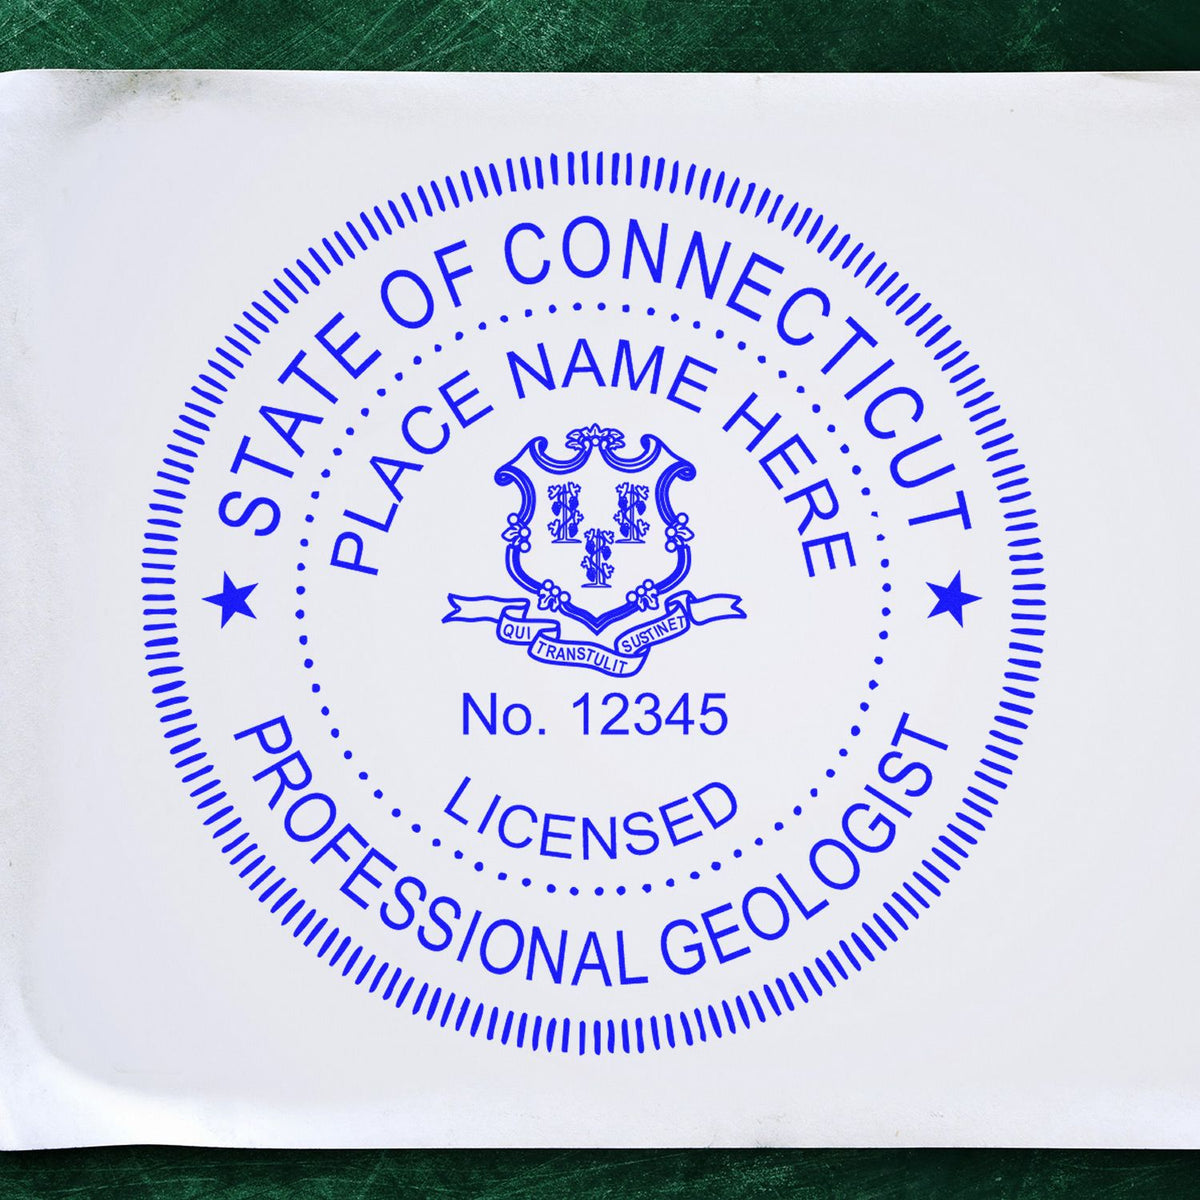 An alternative view of the Self-Inking Connecticut Geologist Stamp stamped on a sheet of paper showing the image in use